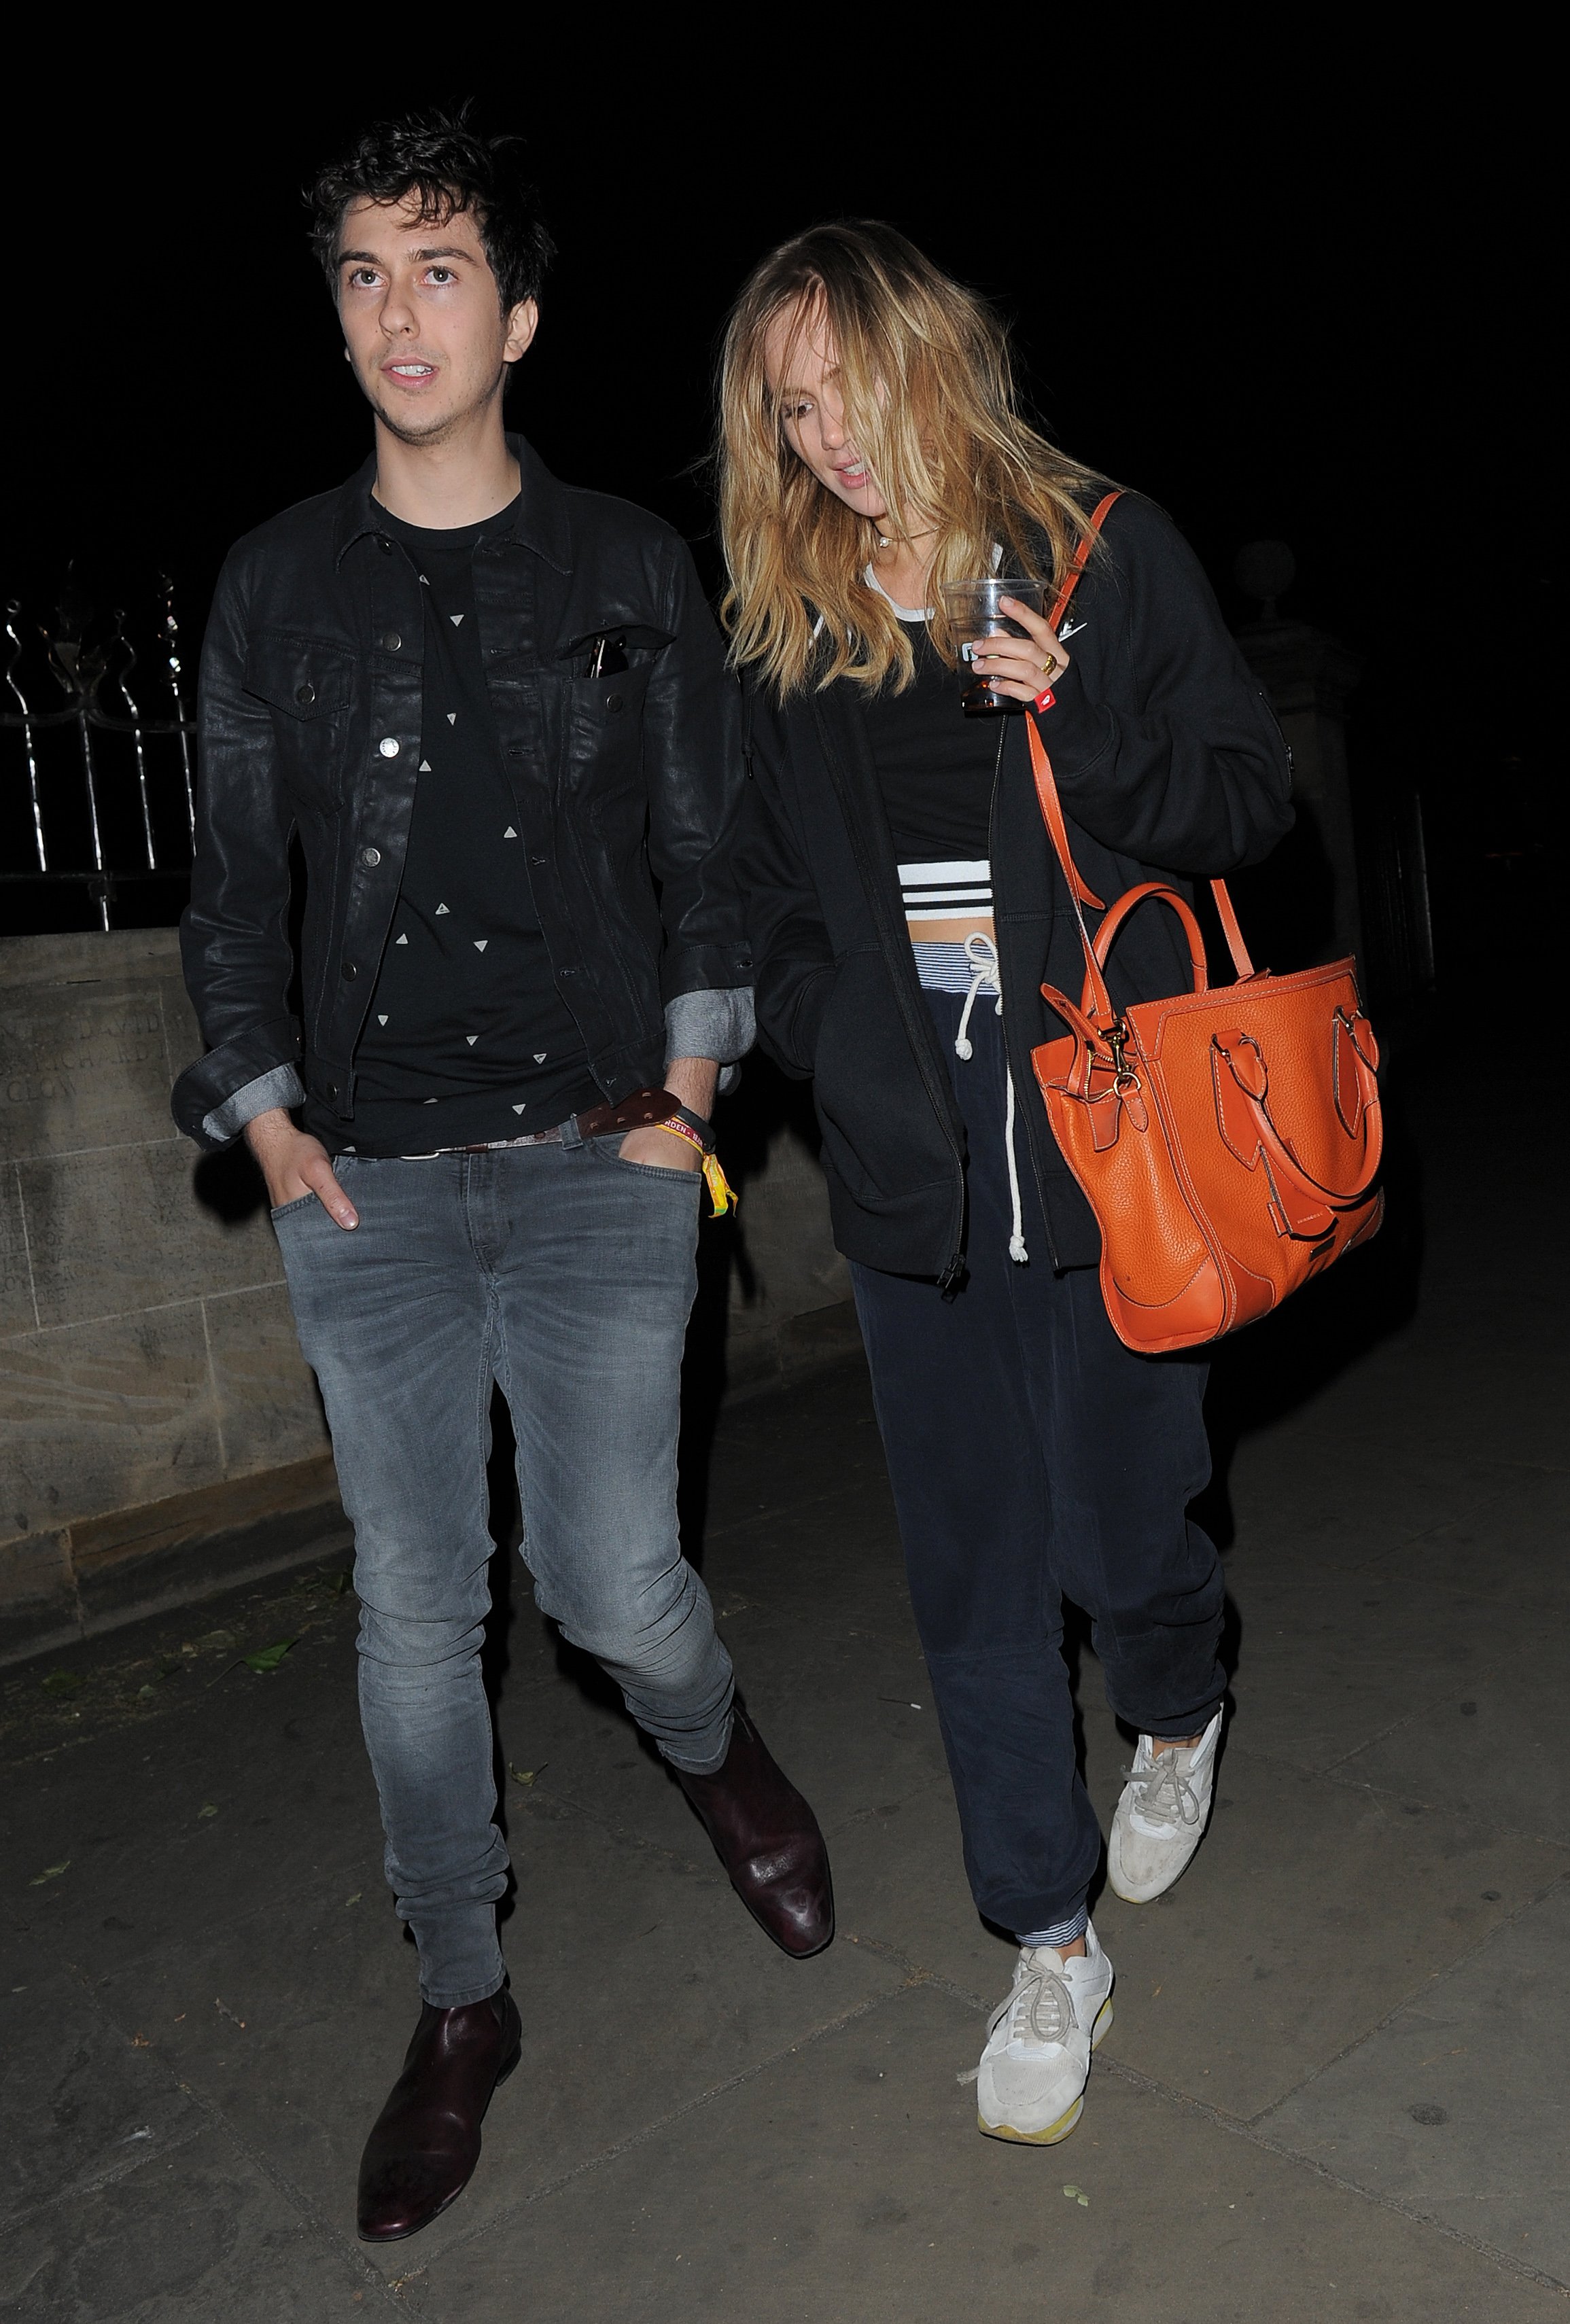 Suki Waterhouse and Nat Wolff leaving The Strokes' concert on June 18, 2015, in London, England. | Source: Getty Images